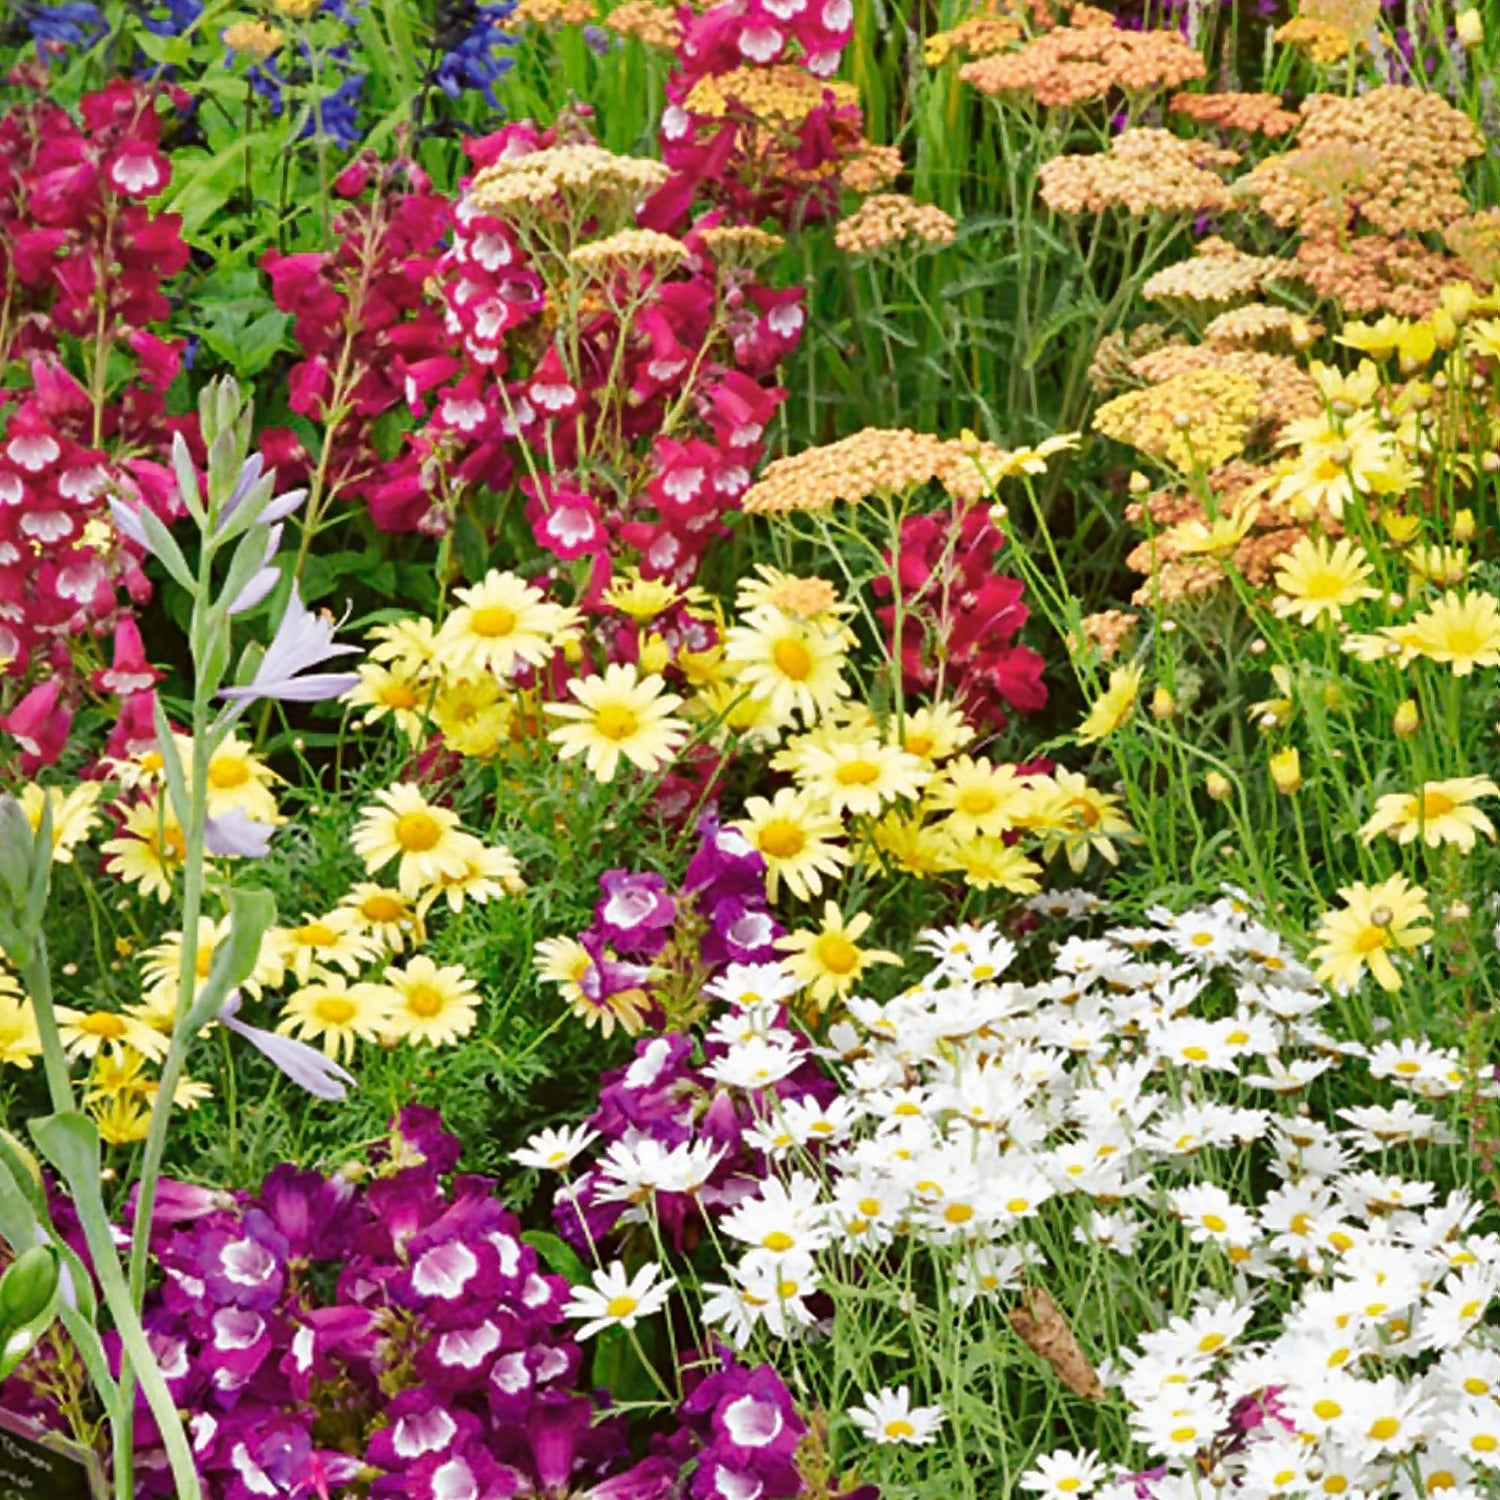 A Guide to Staking Plants and Training Perennials for the Best Blooms